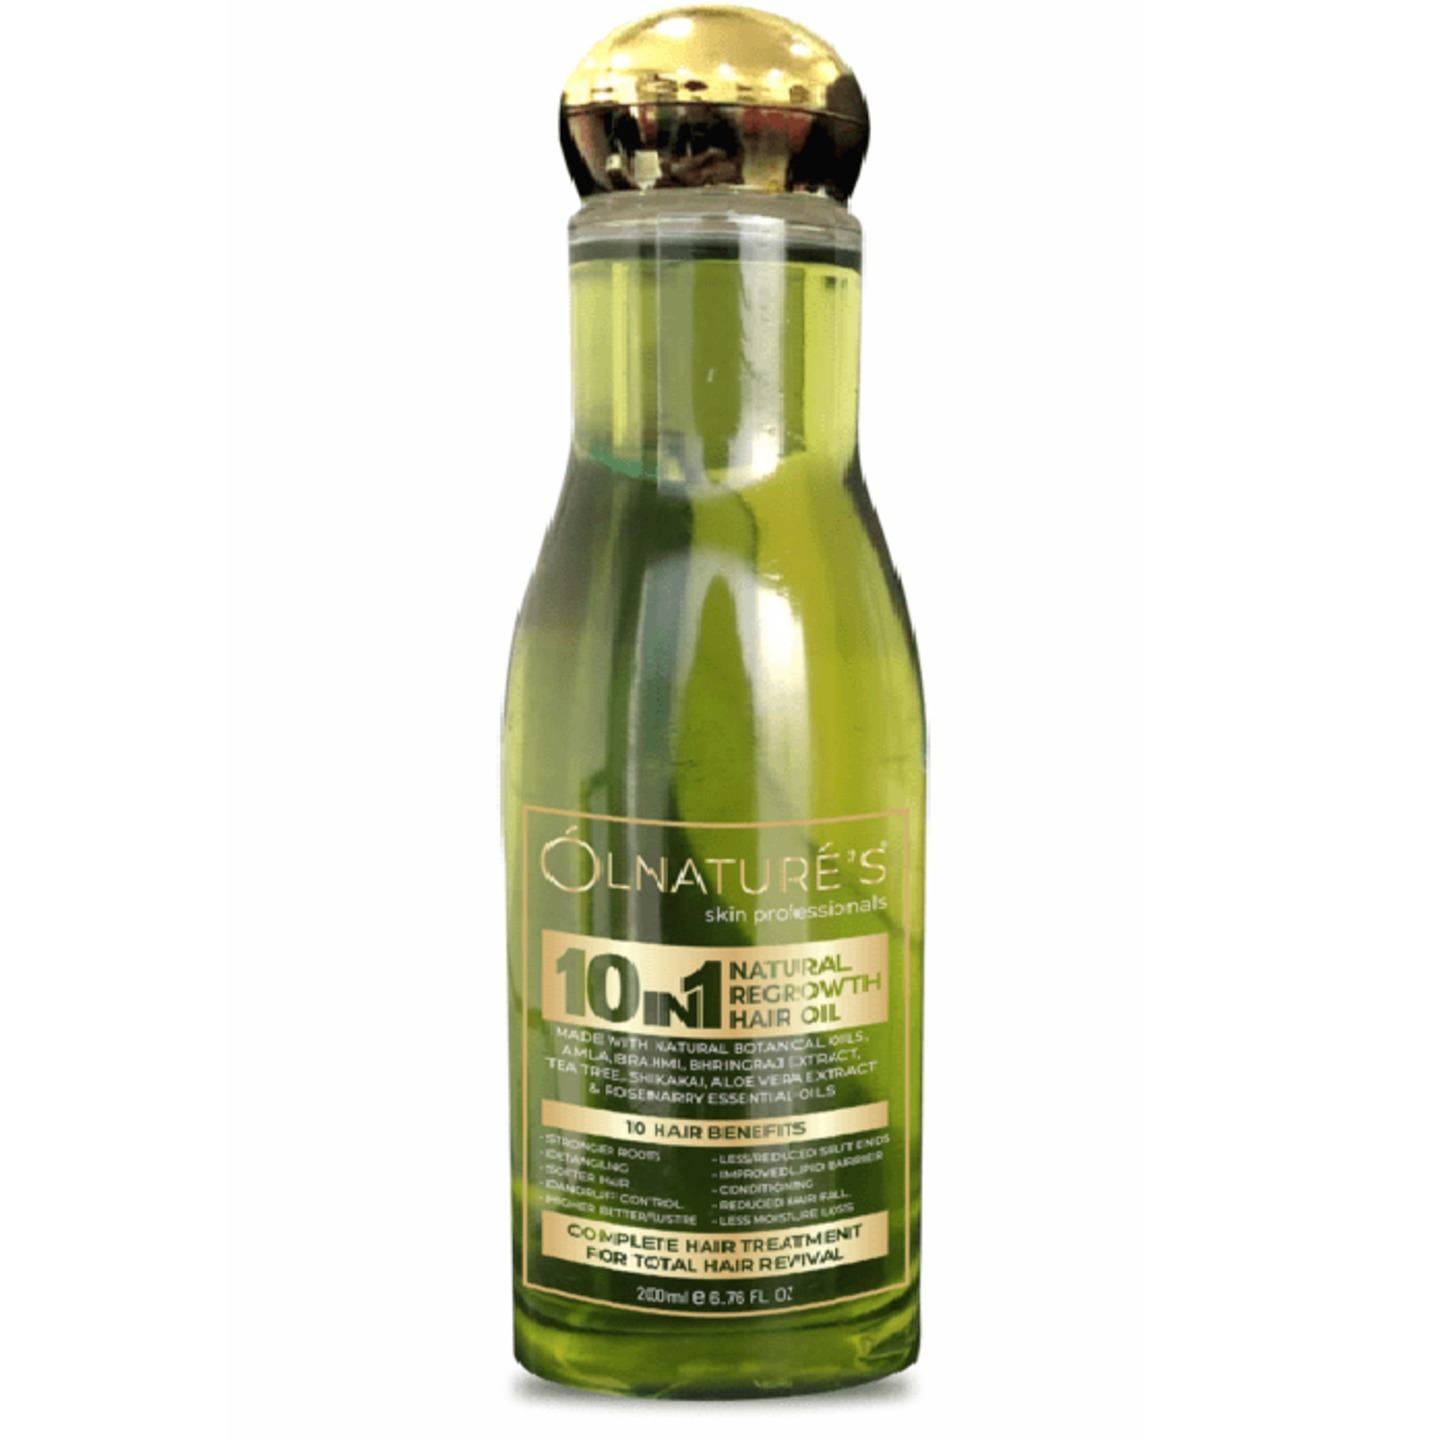 Olnatures 10 in 1 Hair Oil